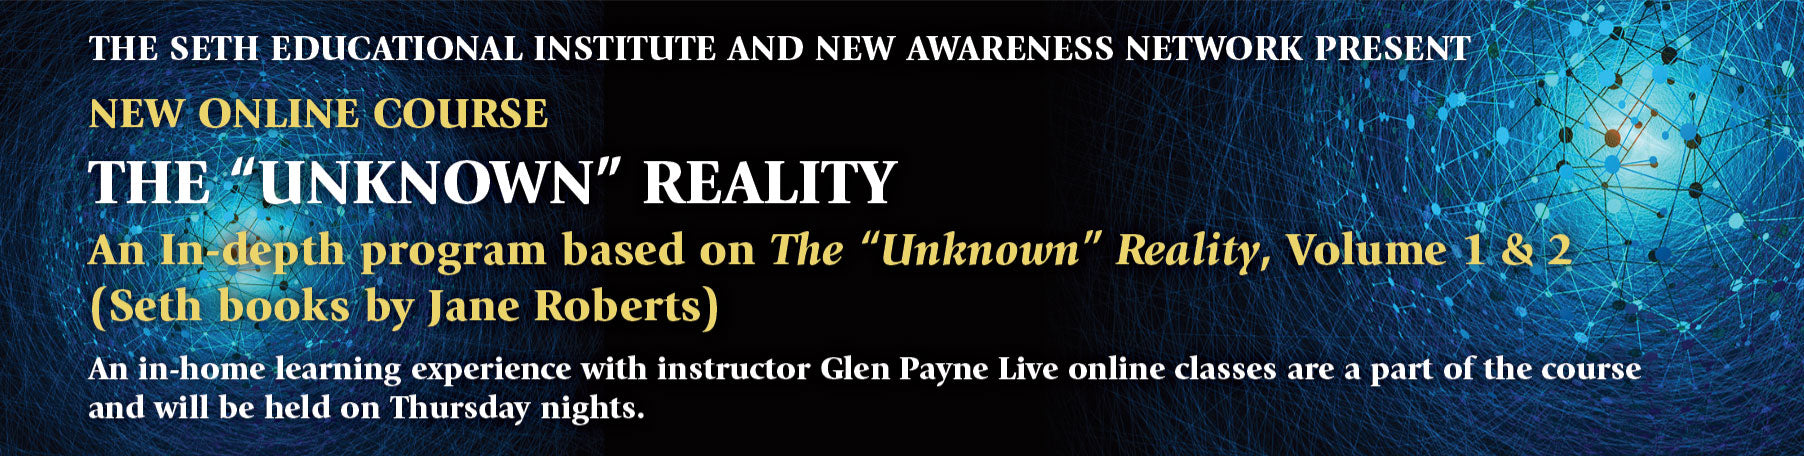 Thank You for Registering! The 'Unknown' Reality